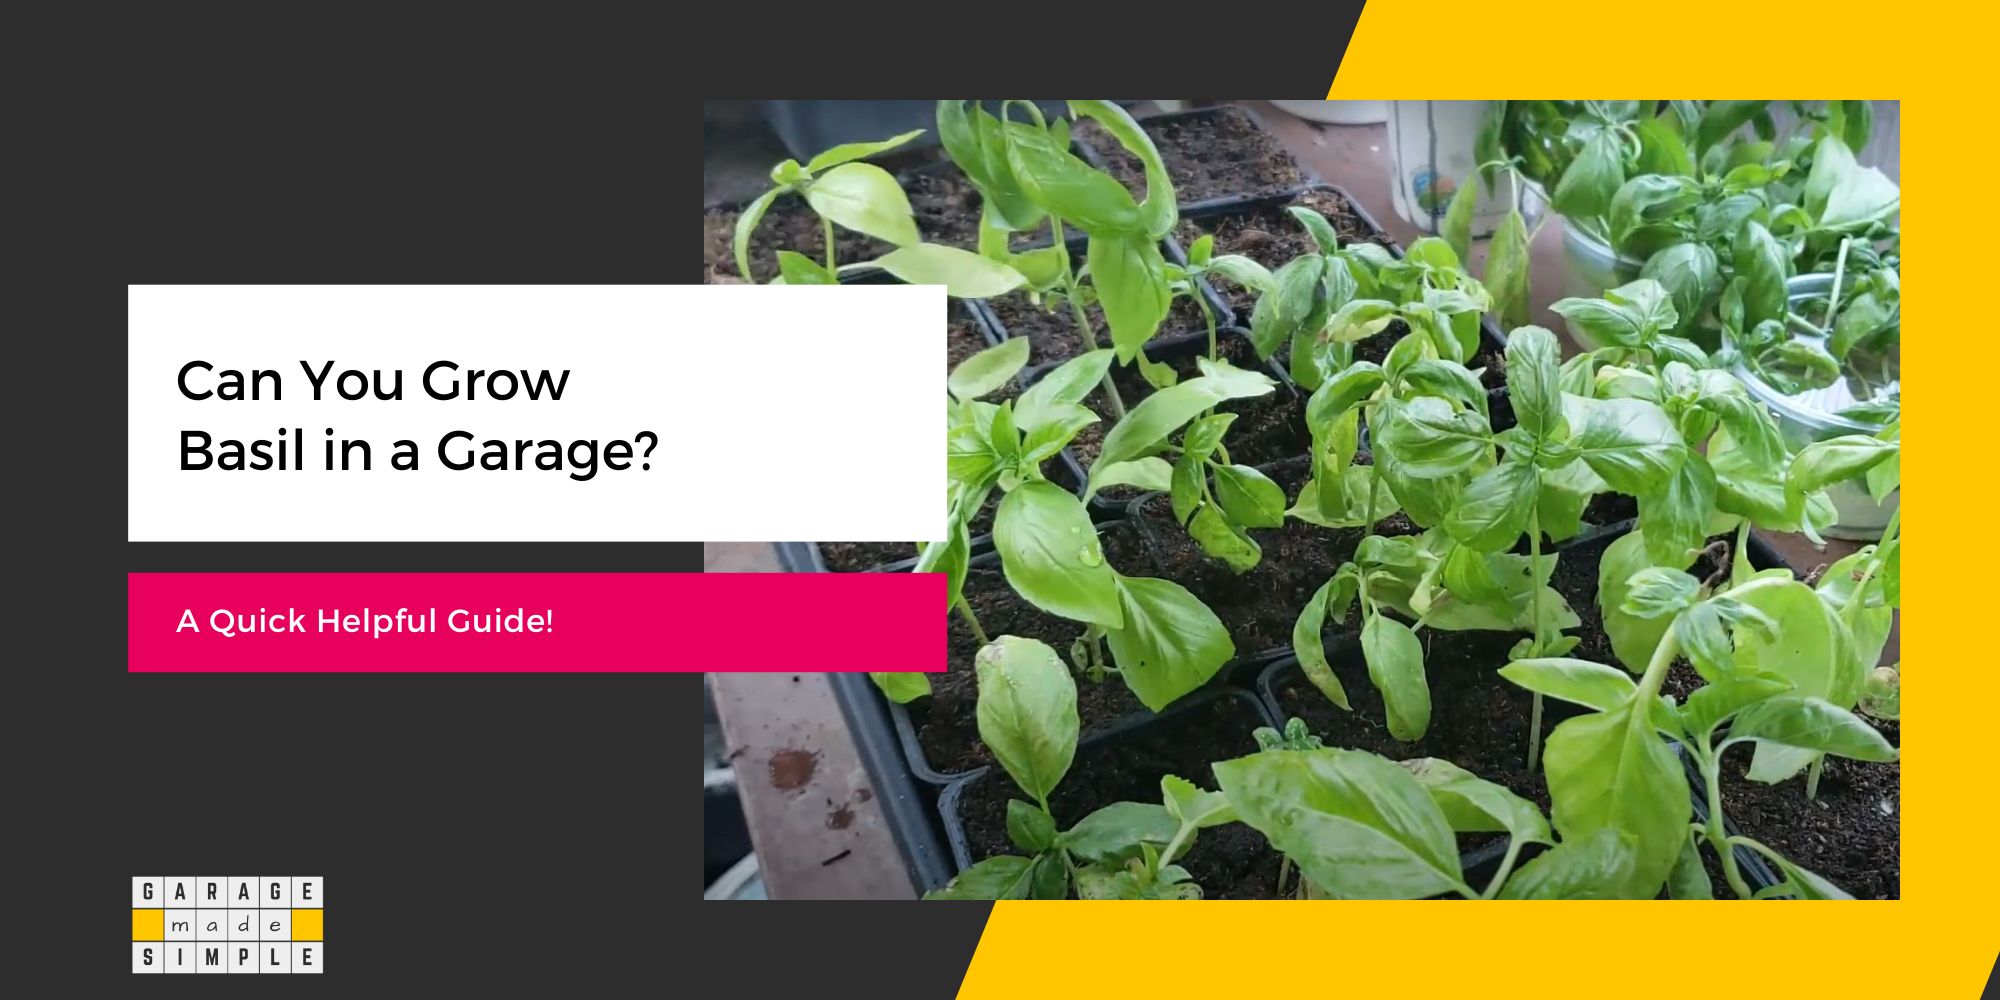 Can You Grow Basil in a Garage? (A Quick Helpful Guide!)